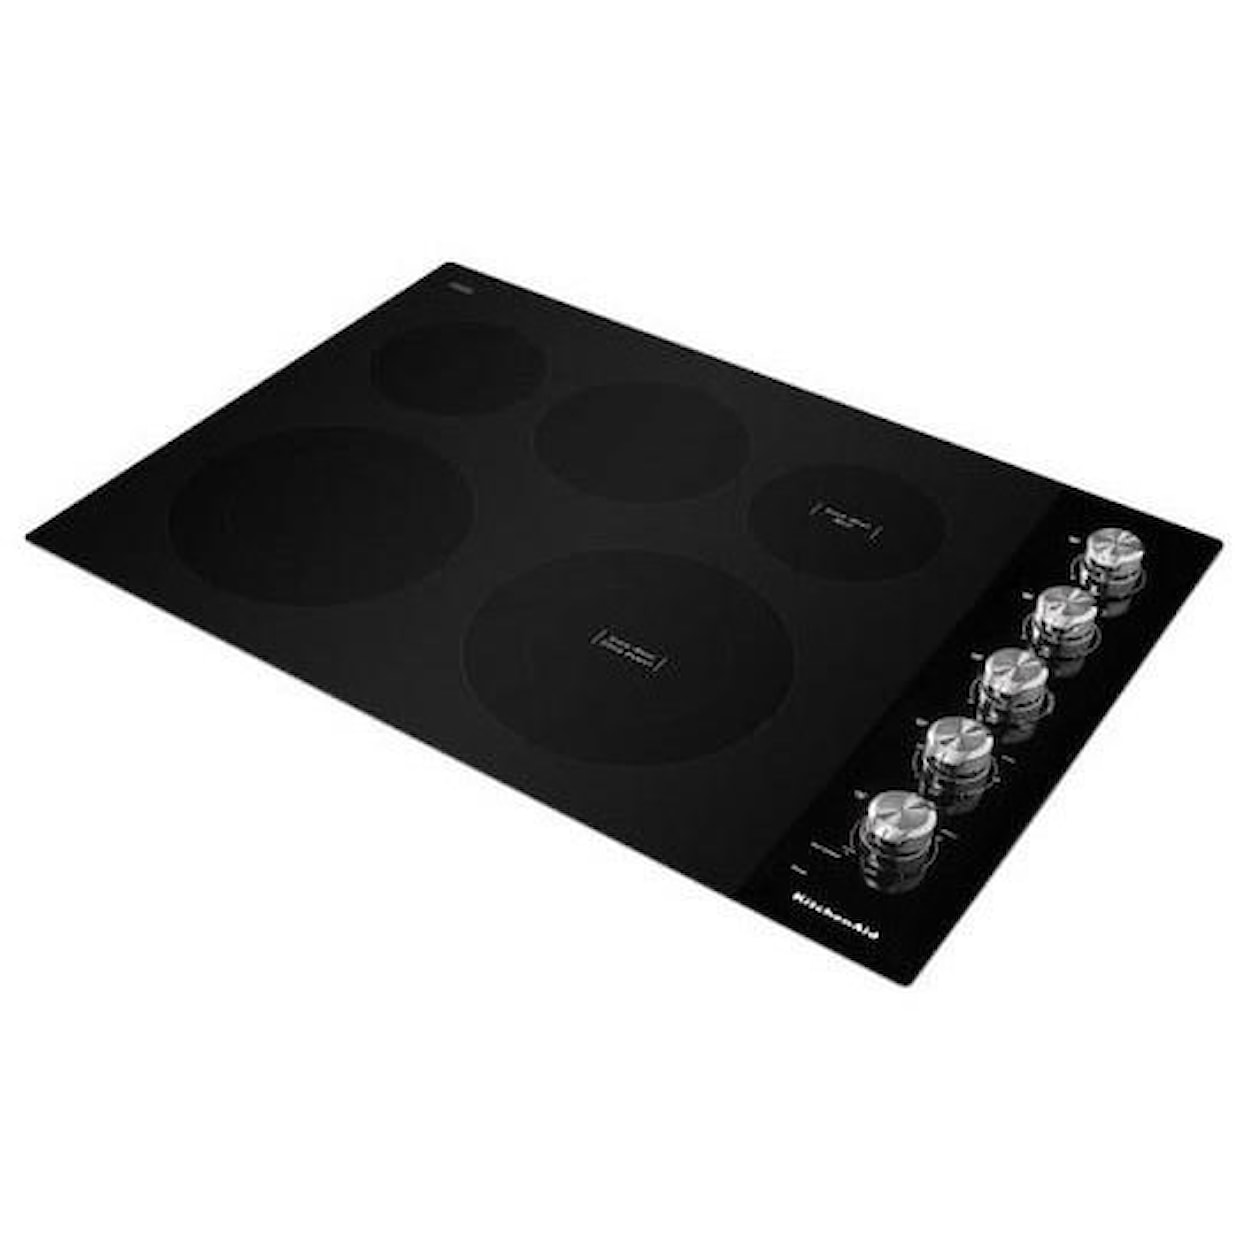 KitchenAid Electric Cooktops 30" Electric Cooktop with 5 Elements